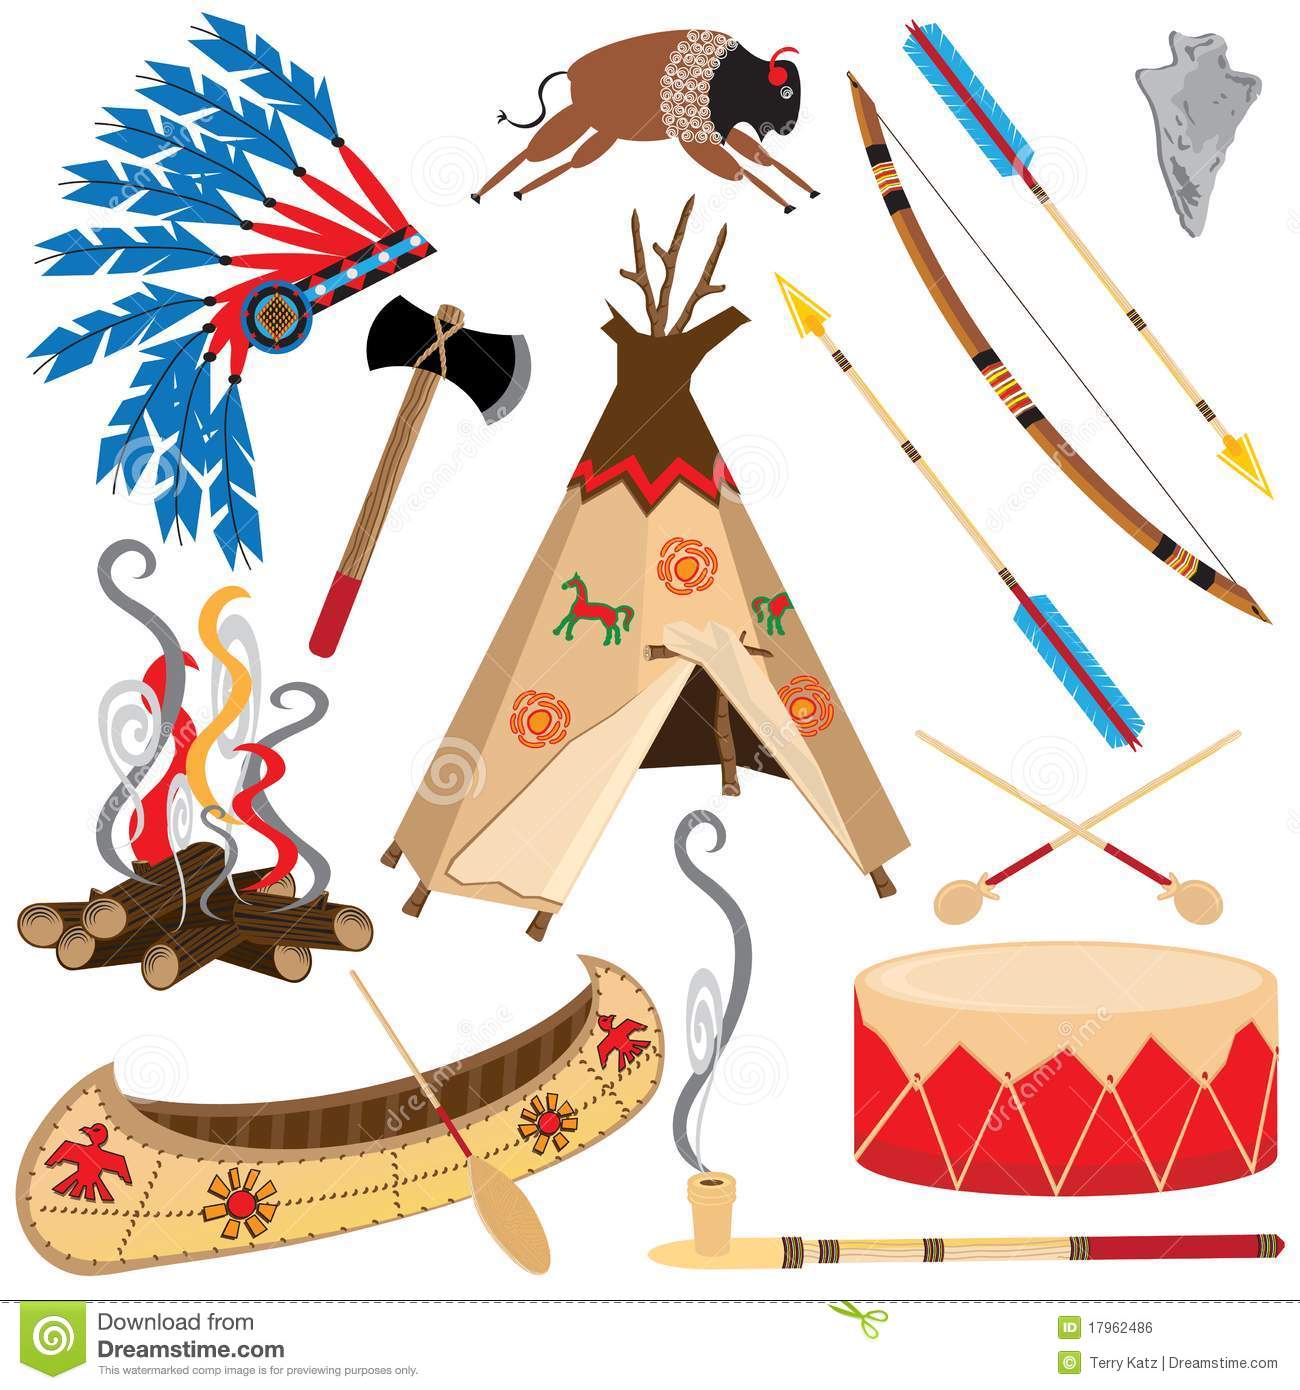 American Indian Clipart Icons Royalty Free Stock Image   Image